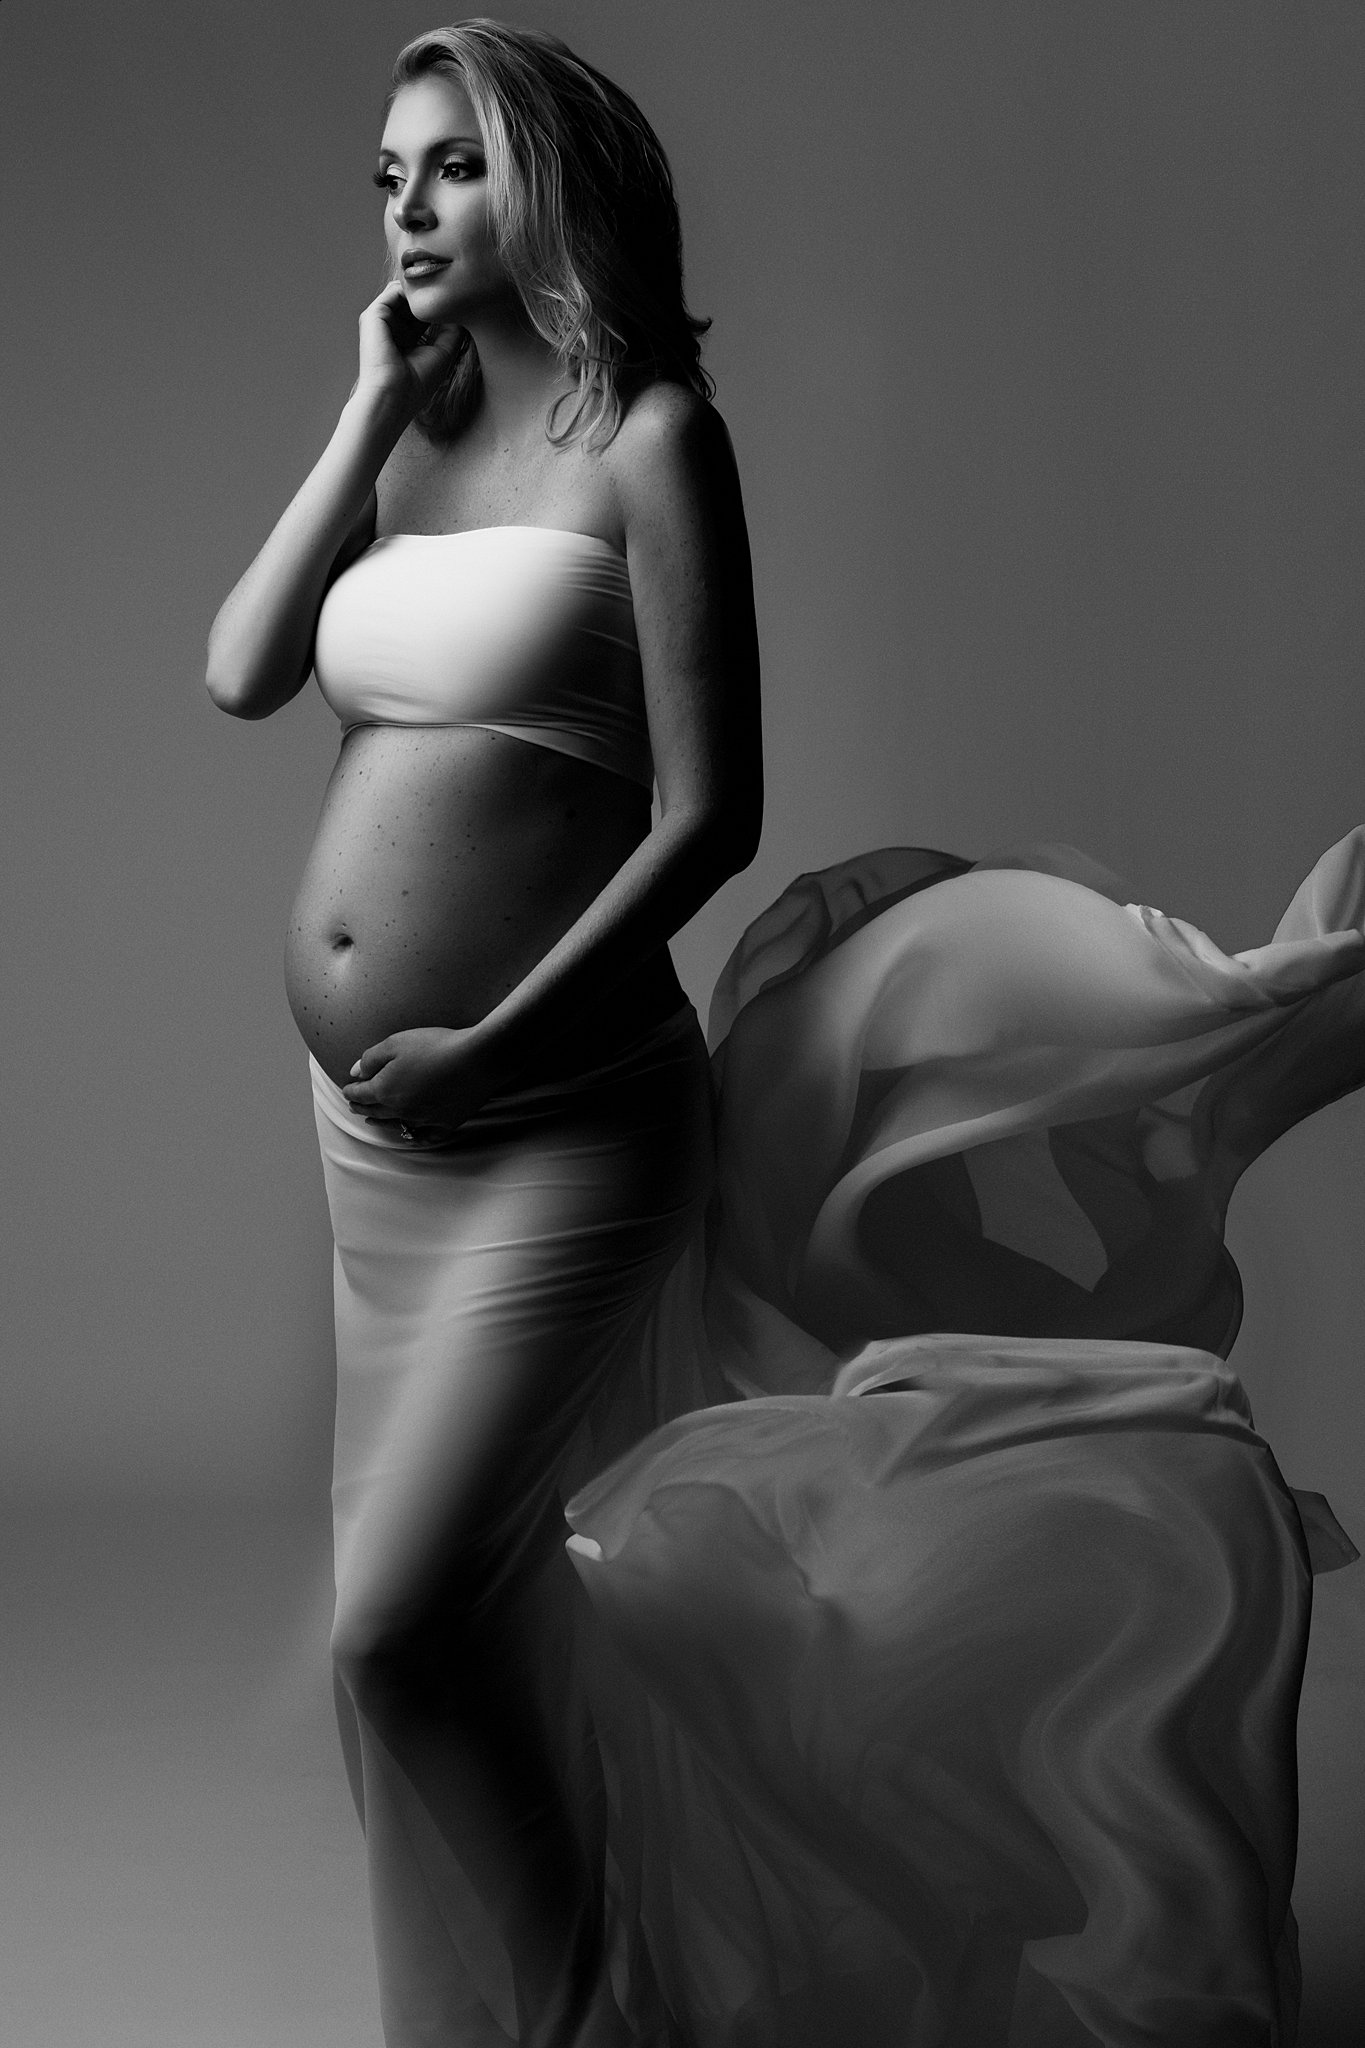 Mother to be wearing a long flowing skirt stands in a studio holding her bump swan coach house atlanta